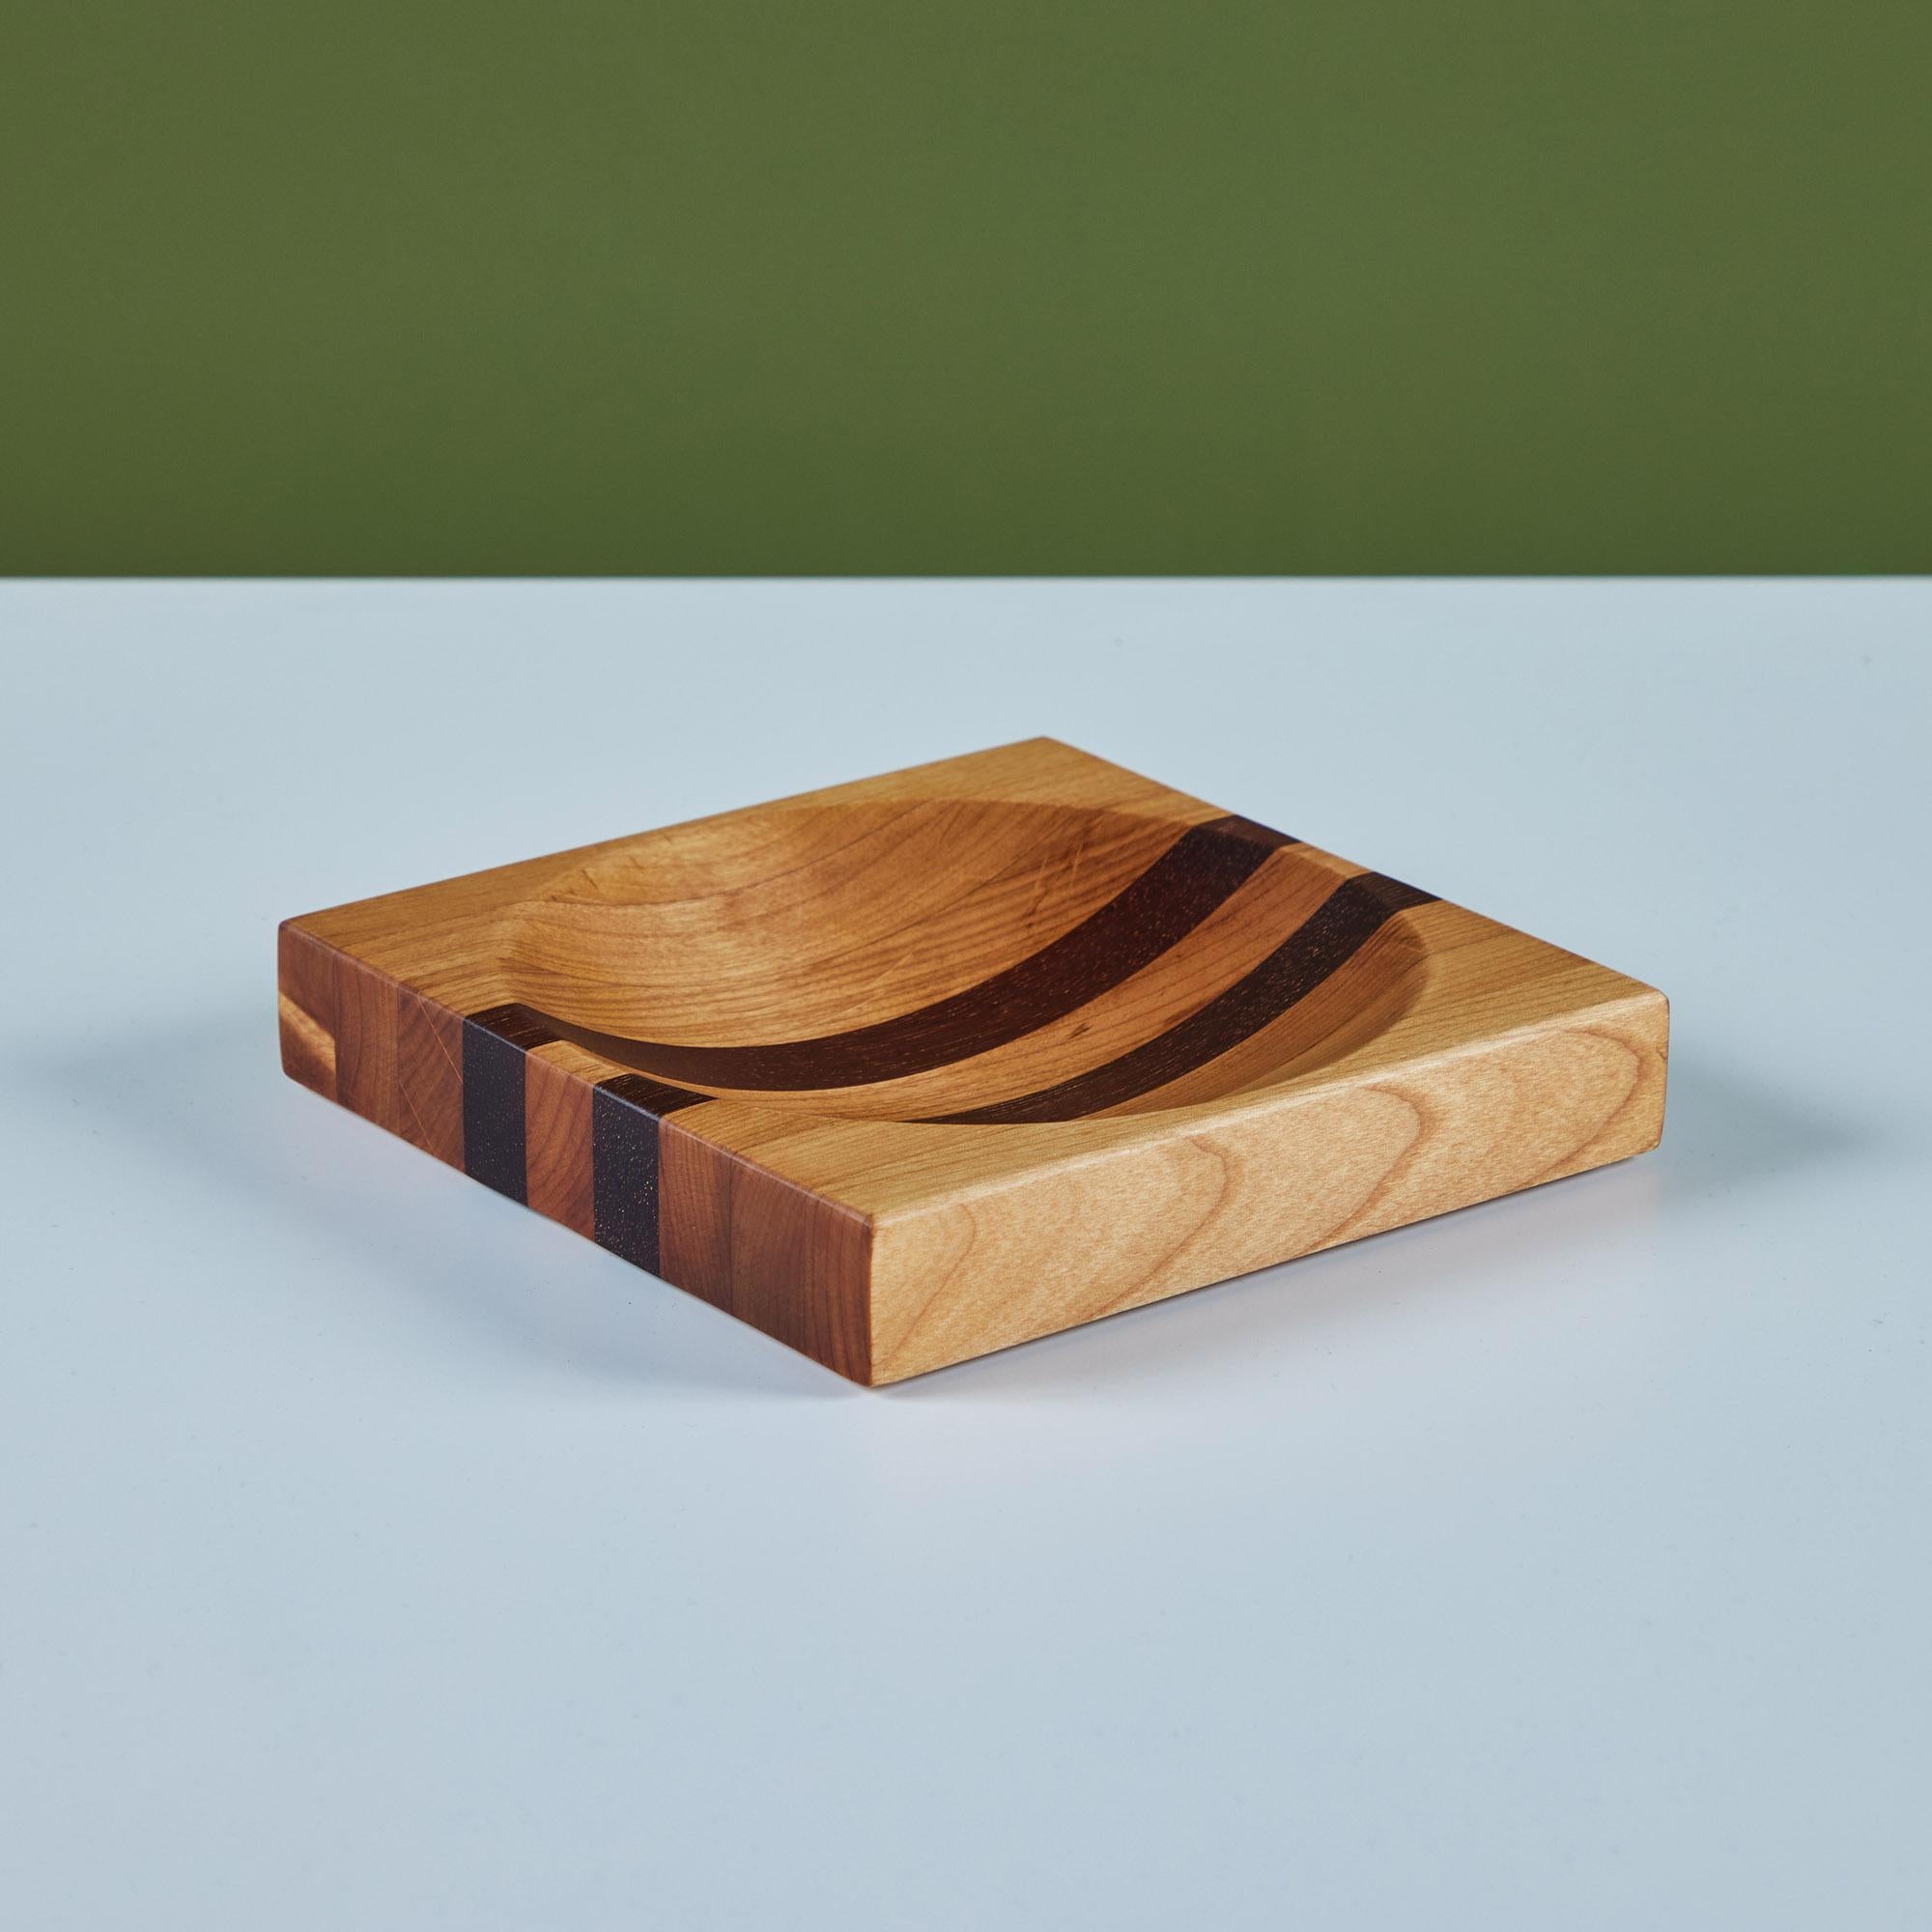 Square wood catchall in both oak and rosewood with a deep round center well. The dish showcases two darker stripes of rosewood down the center. A fun place to hold jewelry, keys or trinkets.

Dimensions
7.25